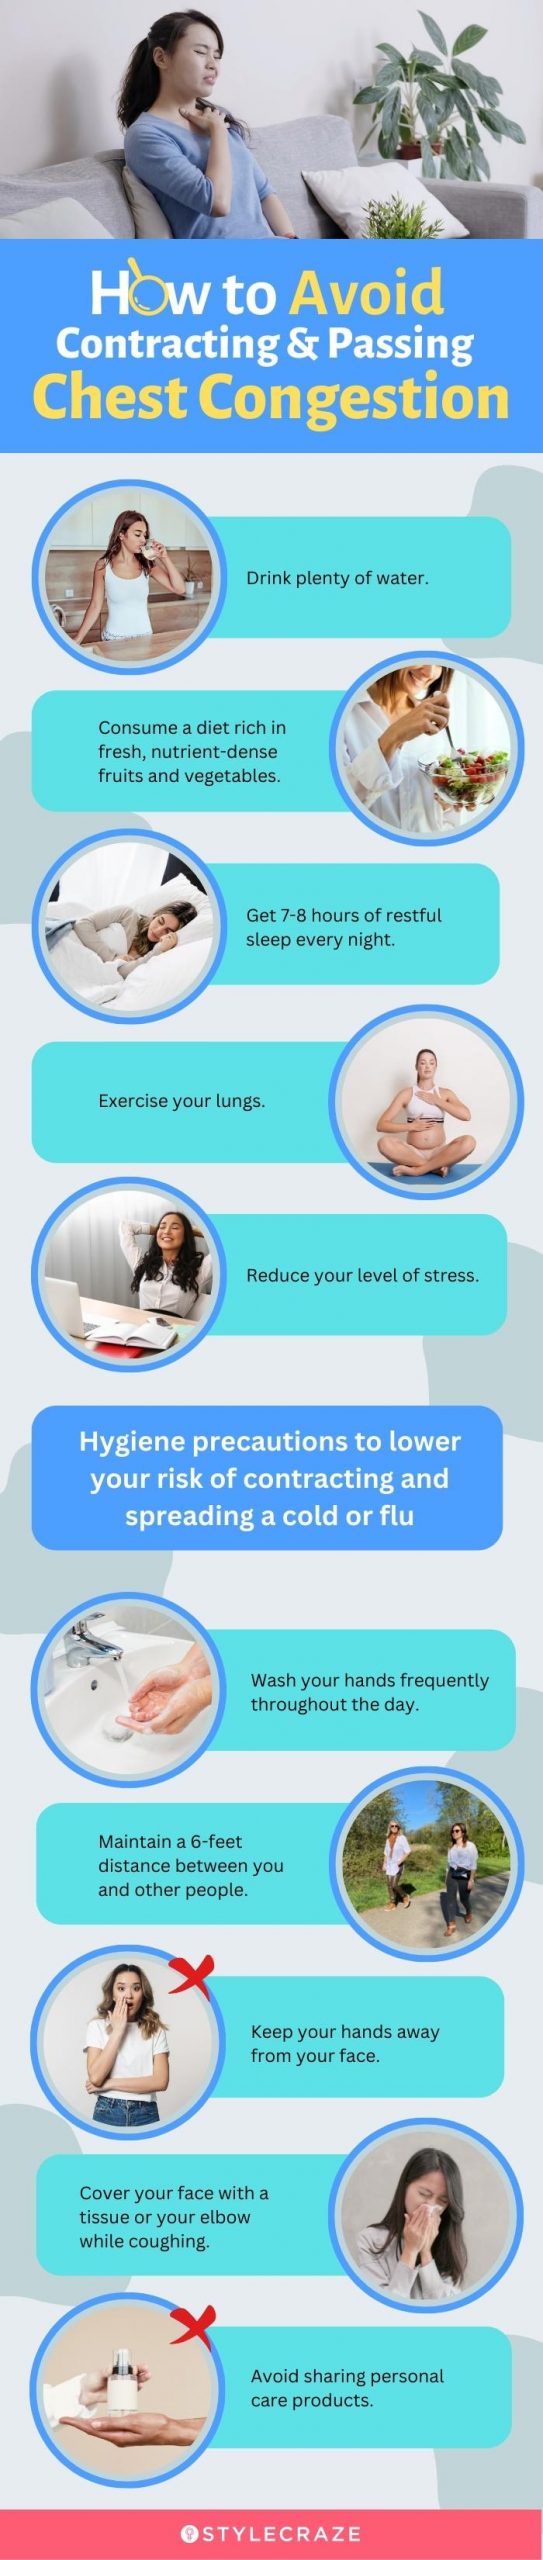 how to avoid contracting & passing chest congestion [infographic]